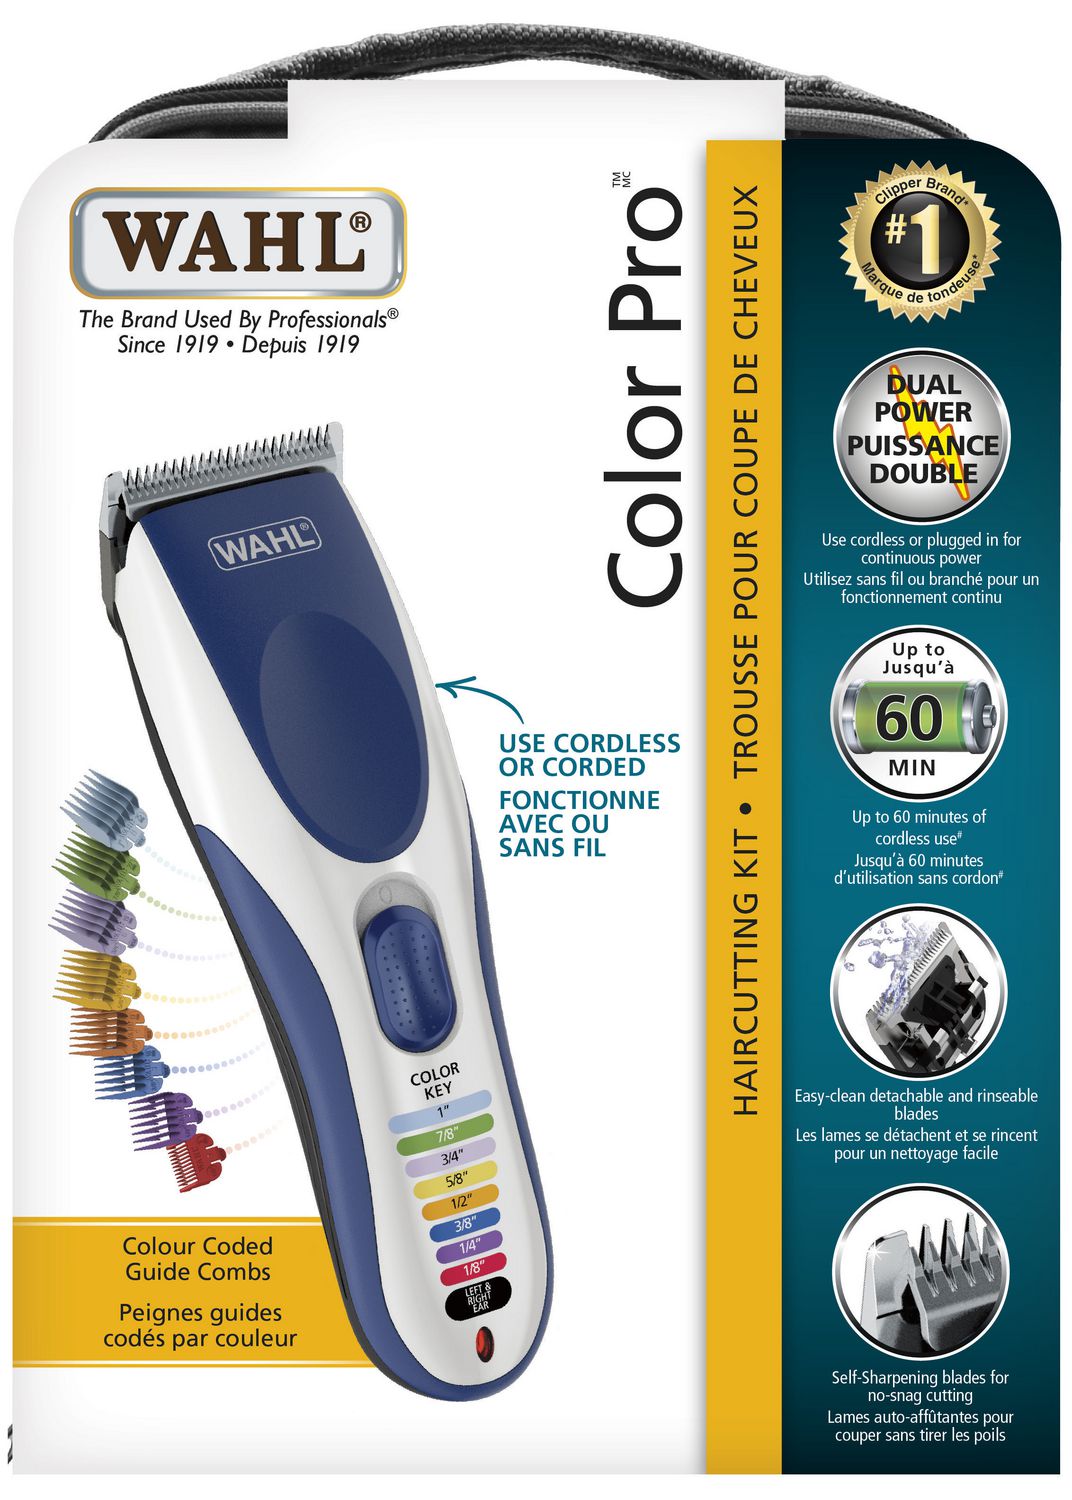 wahl color pro charger